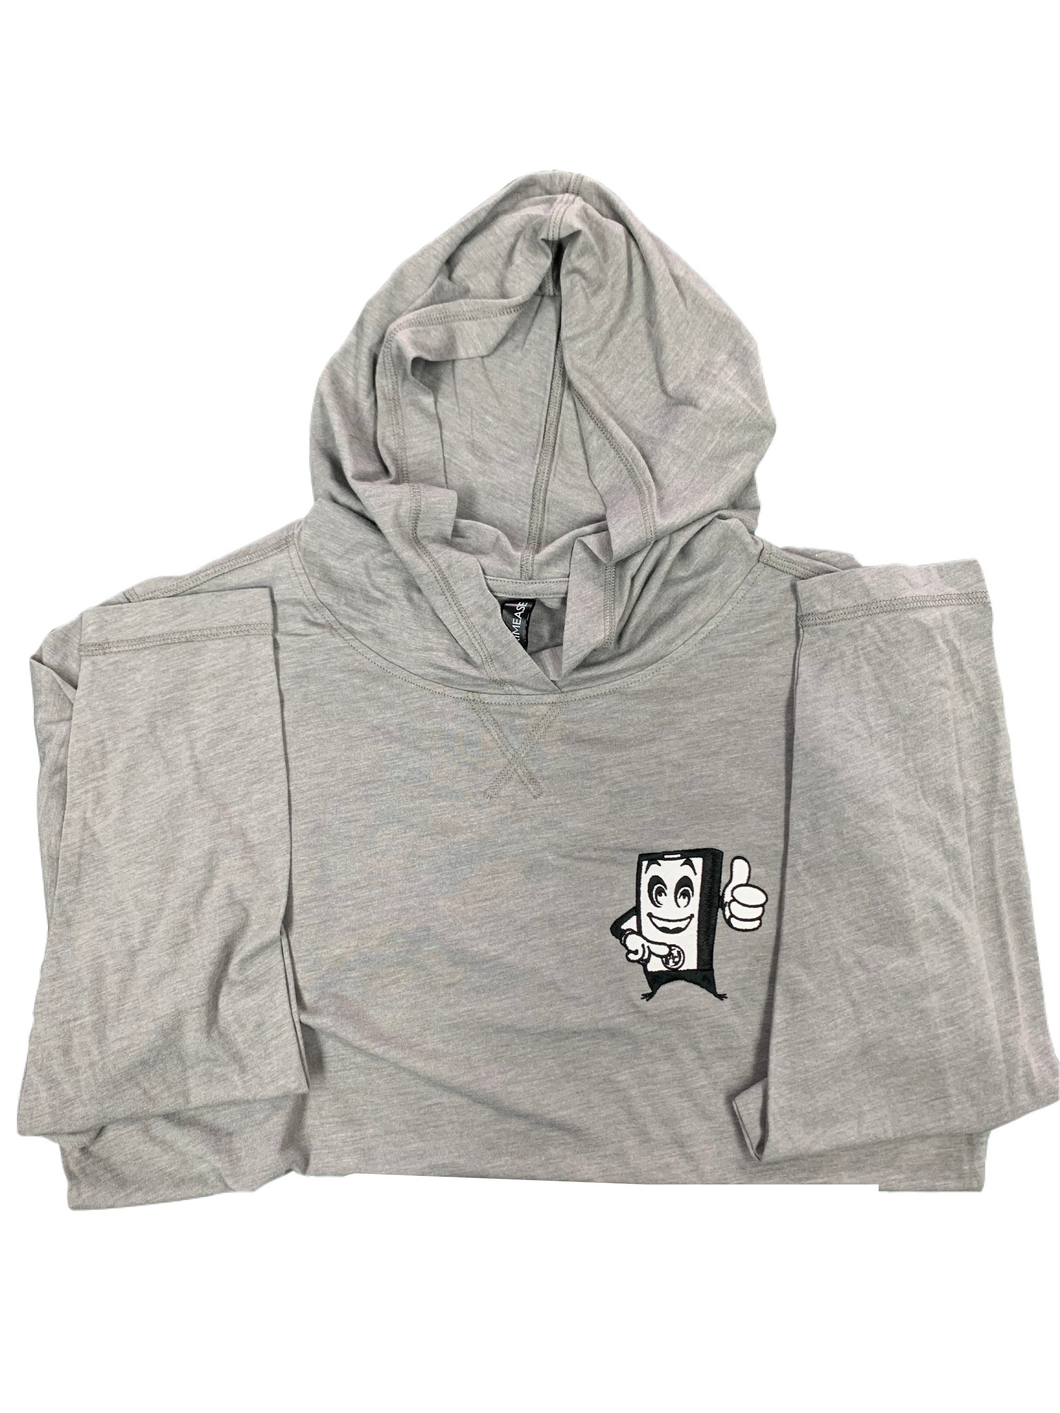 Tri-Blend Hooded Tee - Men's - Mogi Embroidered